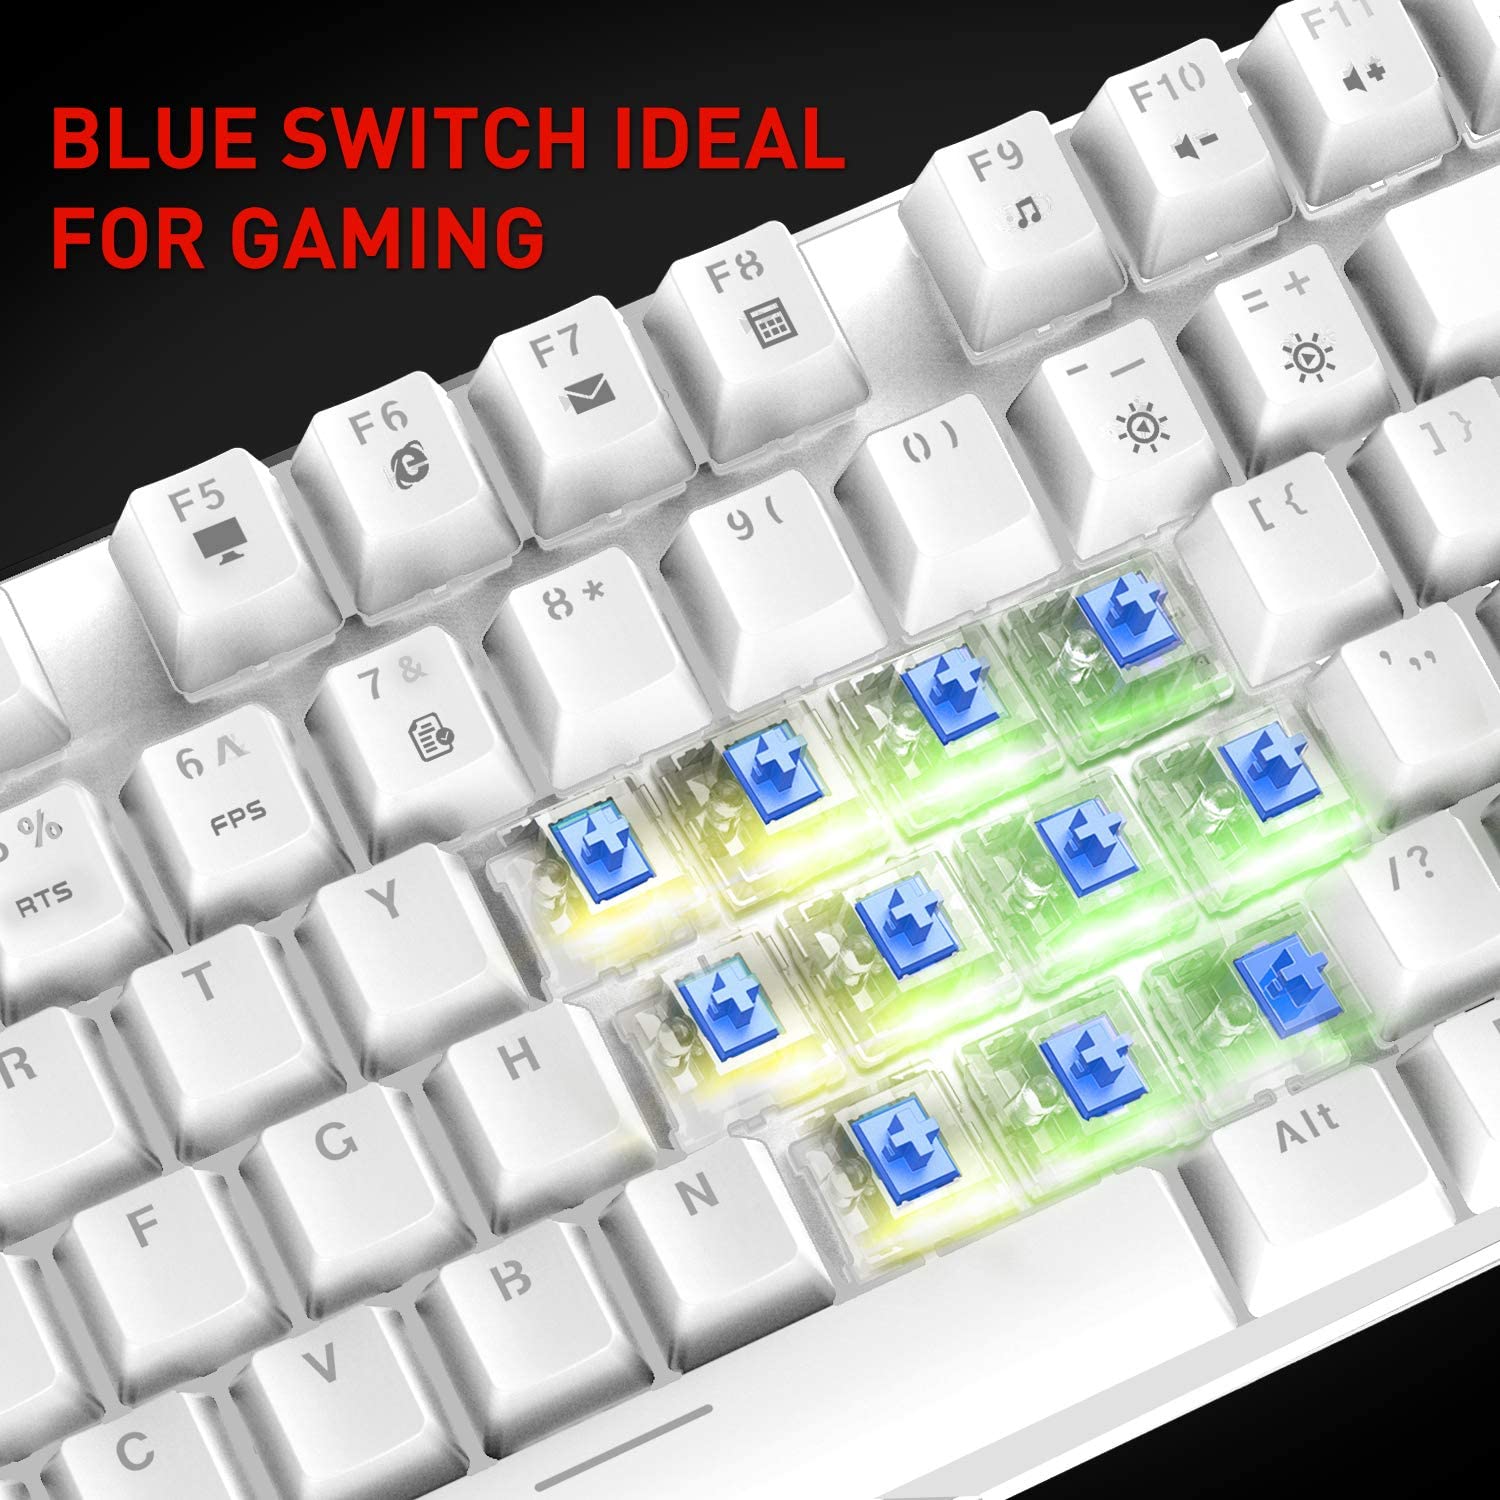 HAVIT KB393L Mechanical Gaming Keyboard and Mouse Combo 104 Keys with Rainbow Backlit